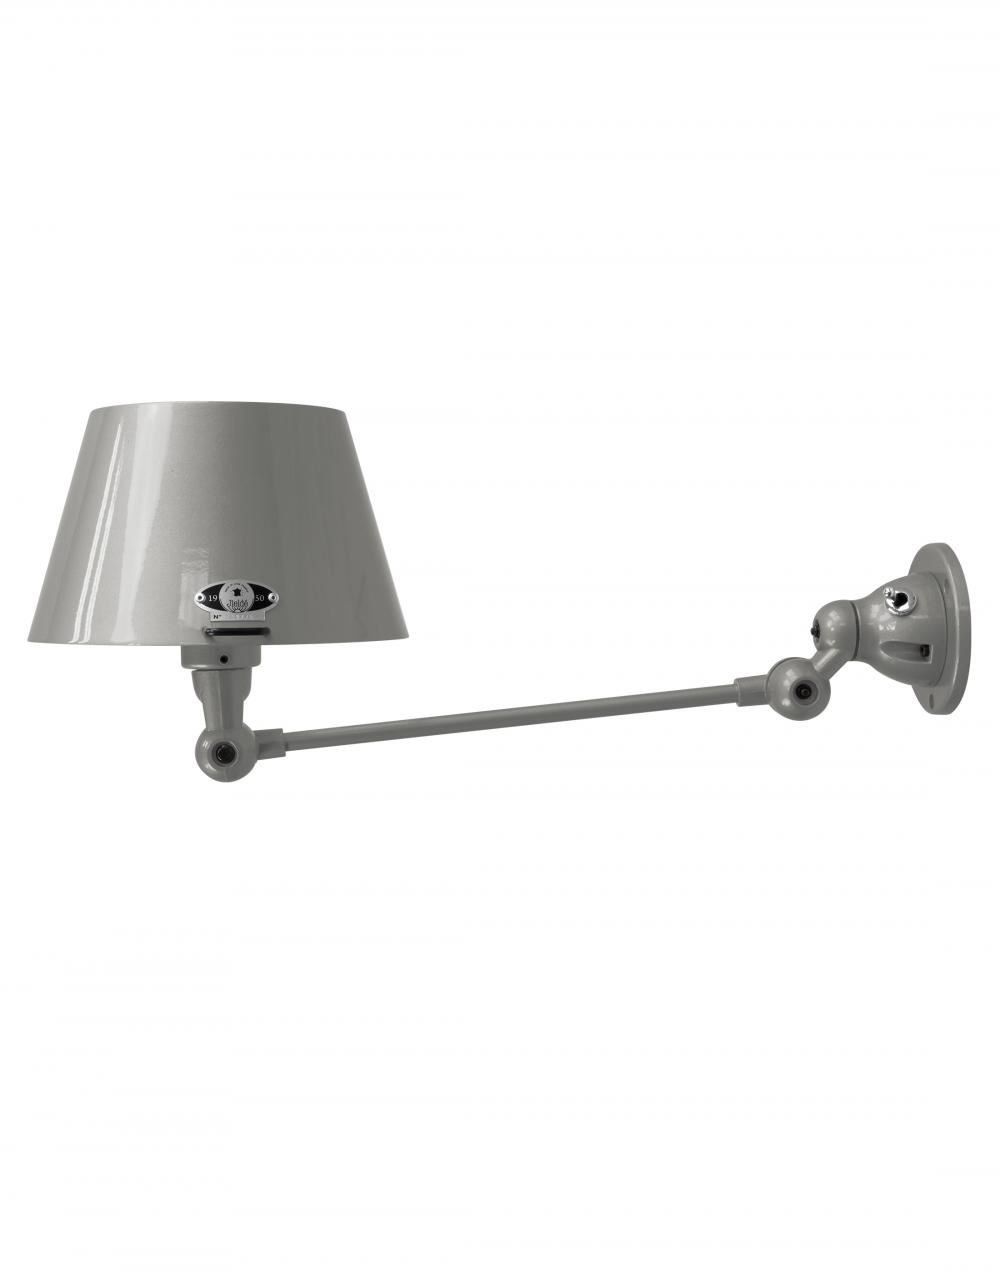 Jielde Aicler One Arm Adjustable Wall Light Straight Shade Mouse Grey Matt Hardwired No Switch